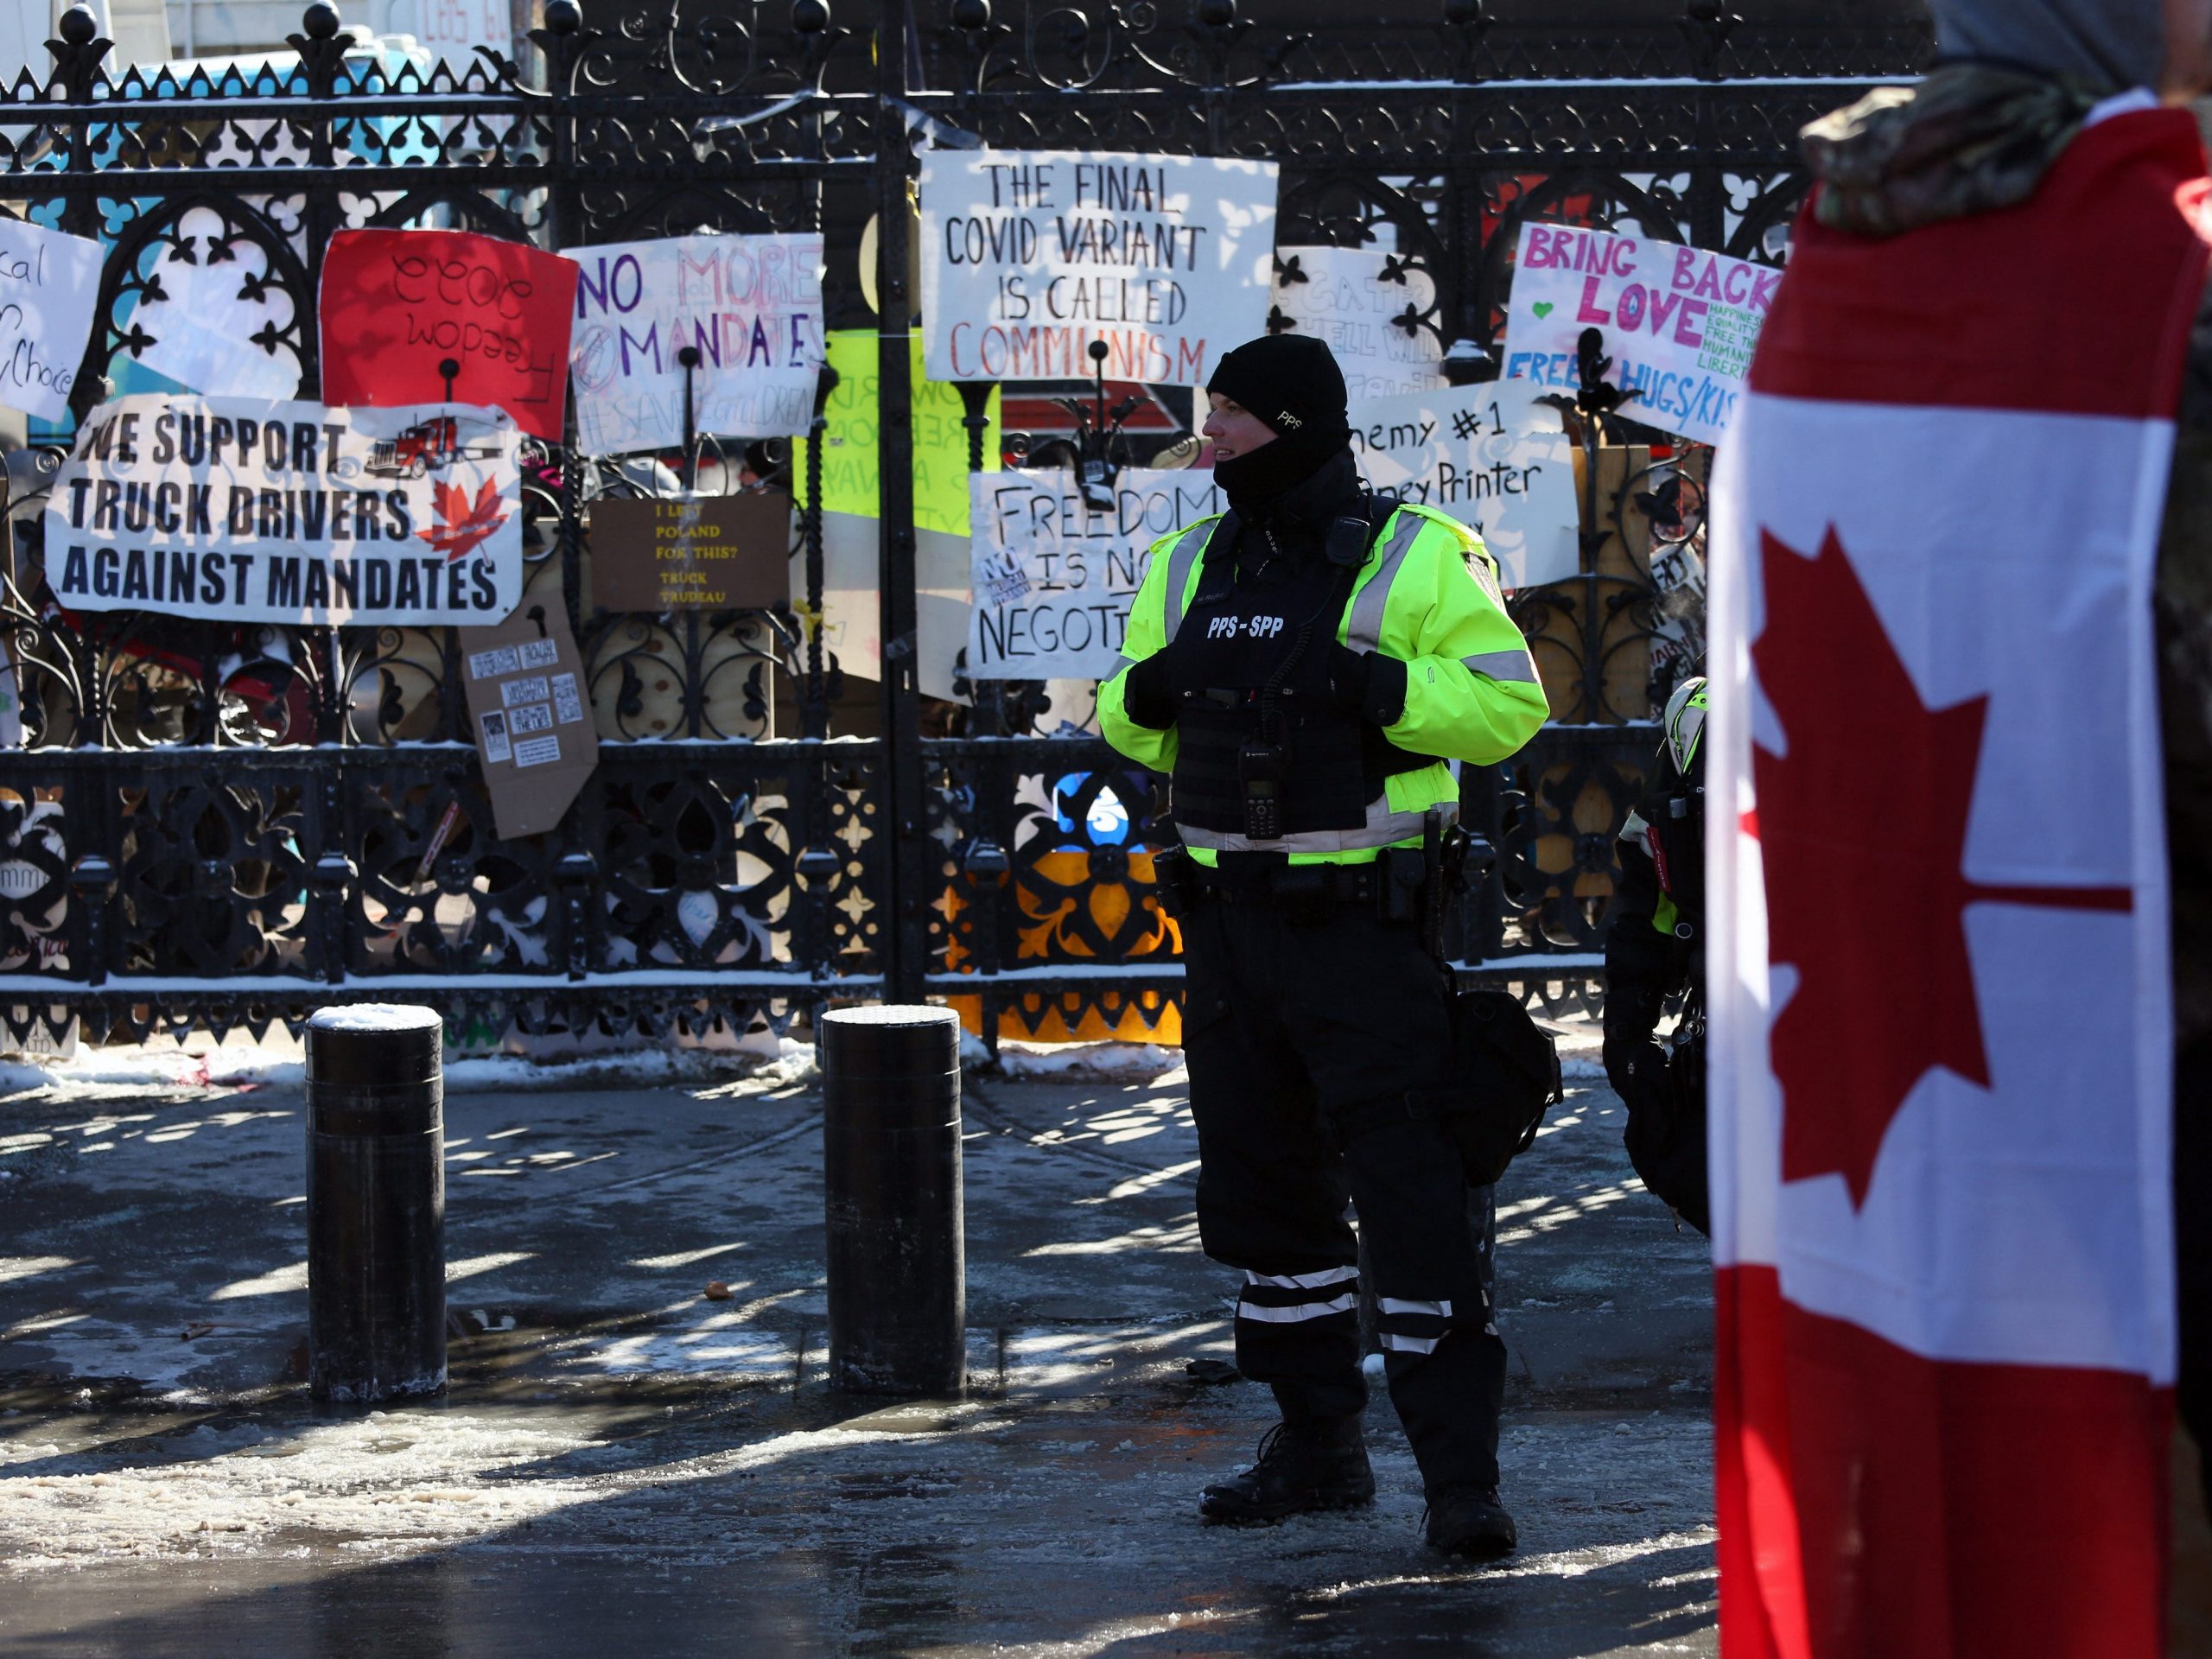 A police officer keeps watch as demonstrators against mandates and restrictions related to Covid-19 vaccines gather in Ottawa, Ontario, Canada, on February 5, 2022. - Protesters again poured into Toronto and Ottawa early on February 5 to join a convoy of truckers whose occupation of Ottawa to denounce Covid vaccine mandates is now in its second week.